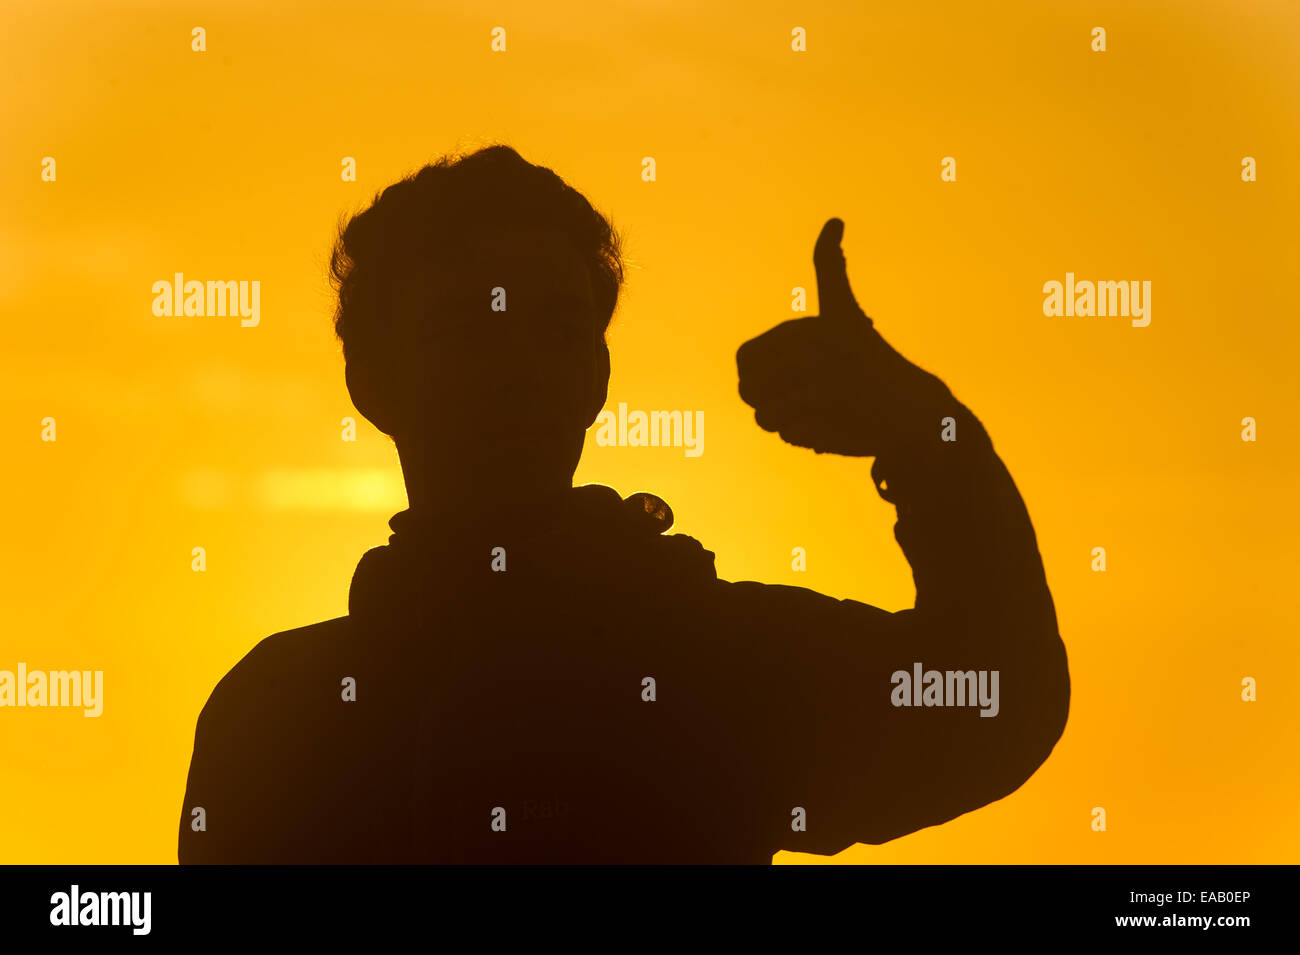 Silhouette of a man at sunrise giving a thumbs up sign. Stock Photo